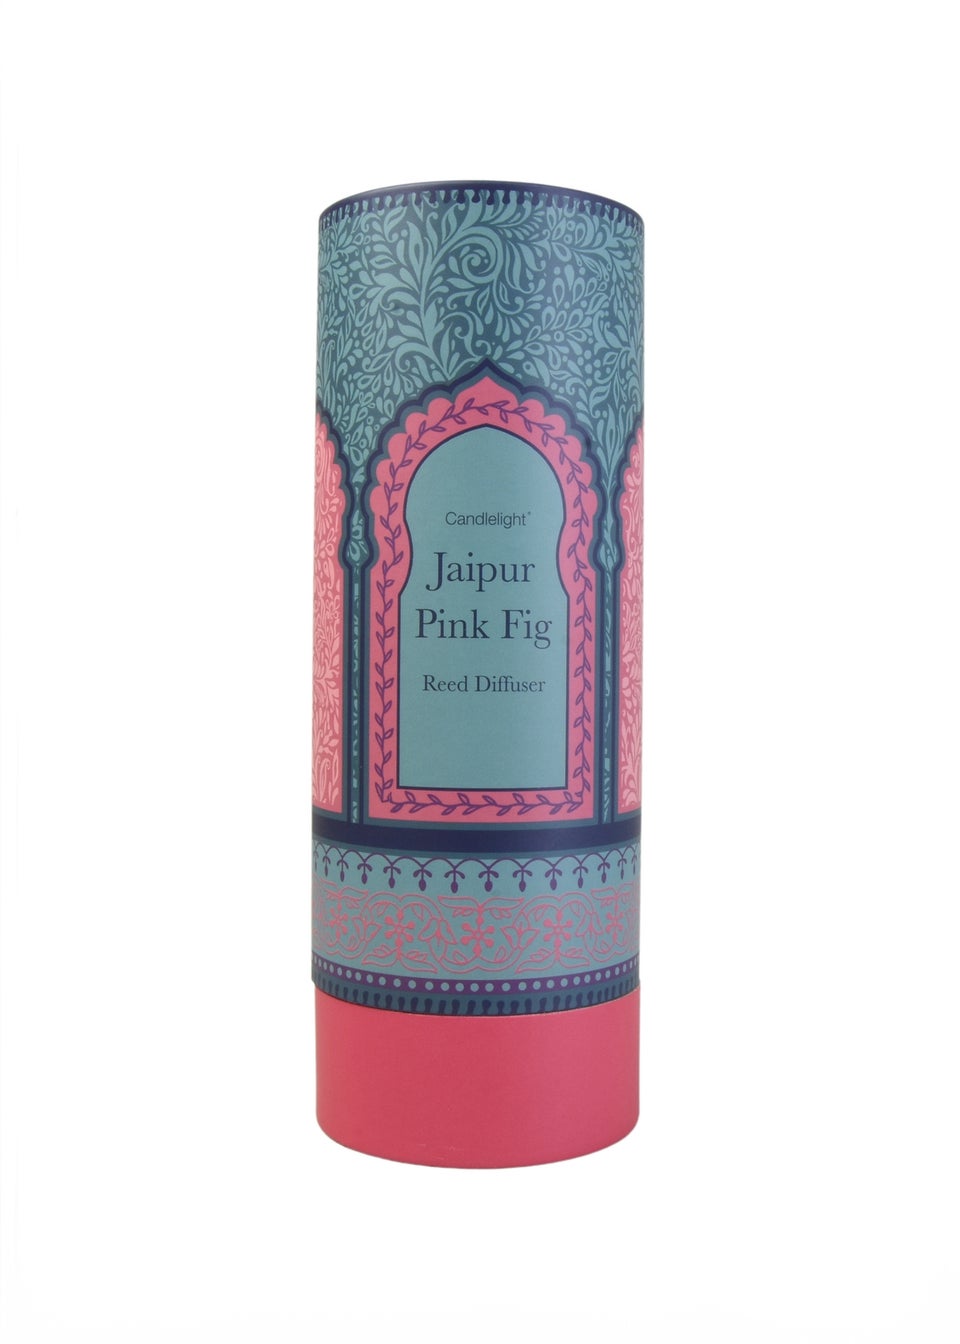 Candlelight Jaipur Pink Fig Reed Diffuser (150ml)